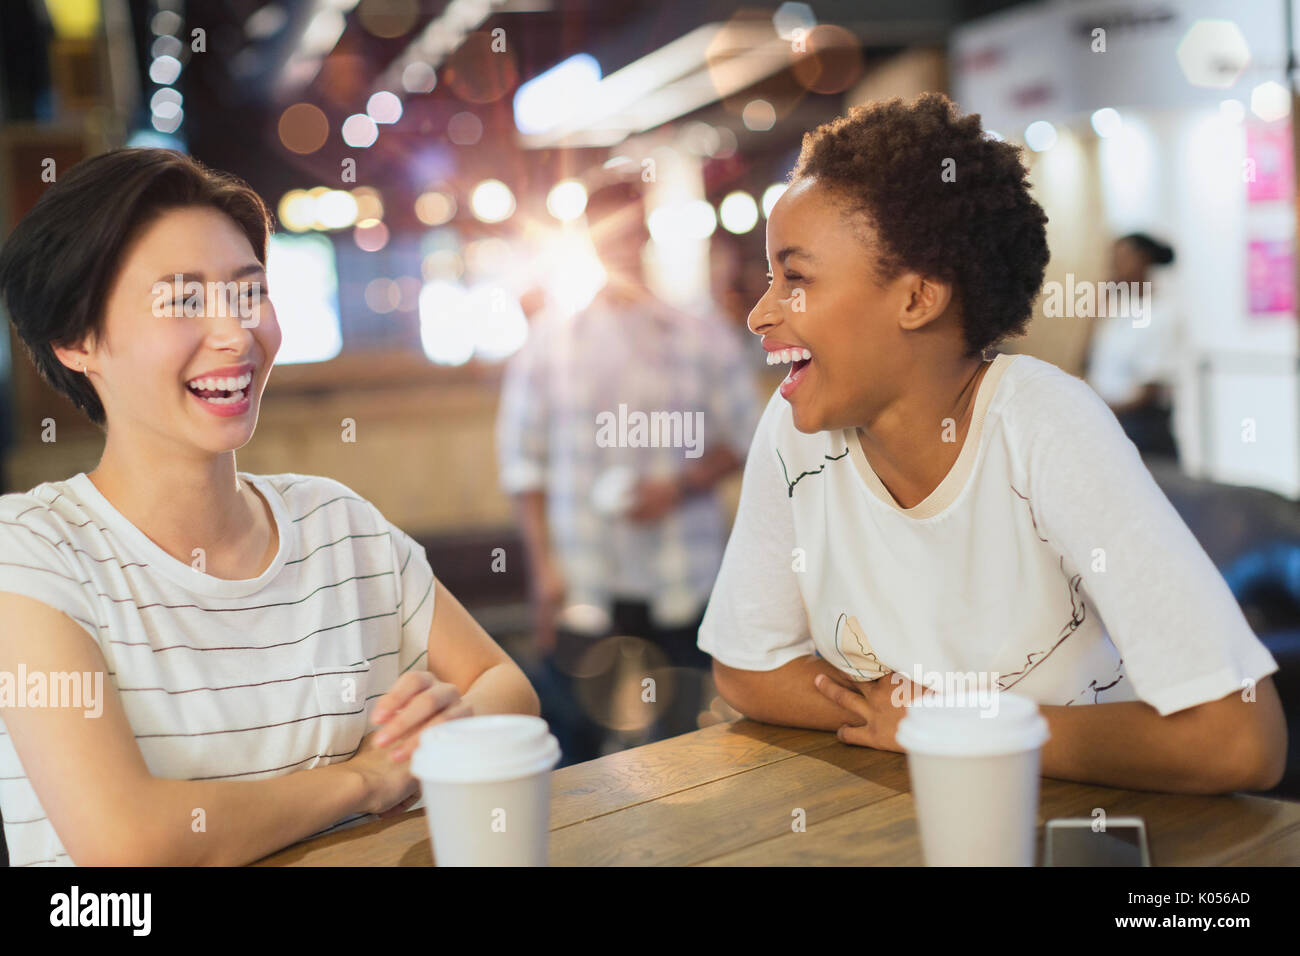 Laughing young women drinking coffee at cafe Stock Photo